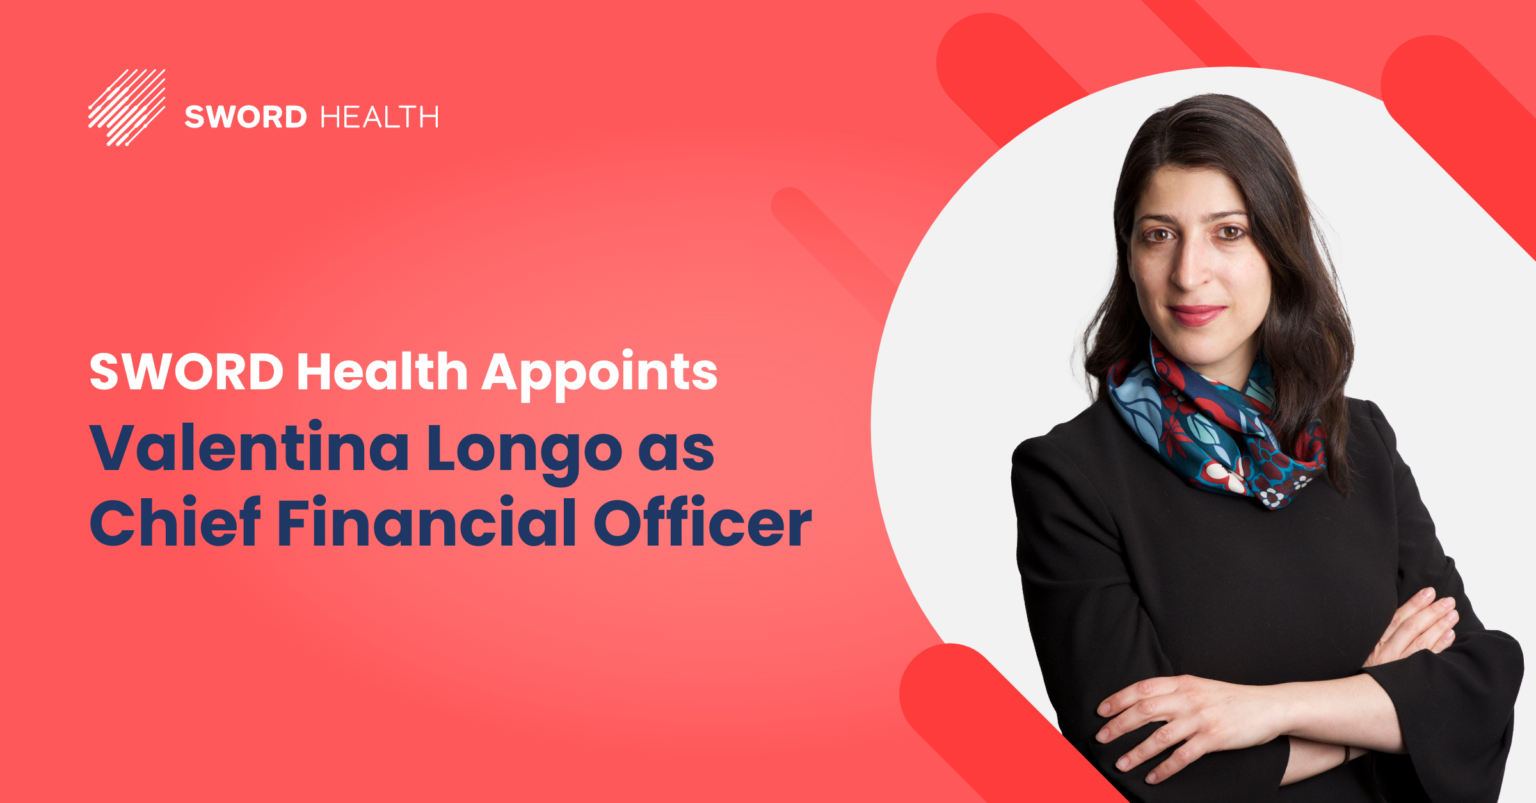 Sword Health appoints Valentina Longo as Chief Financial Officer